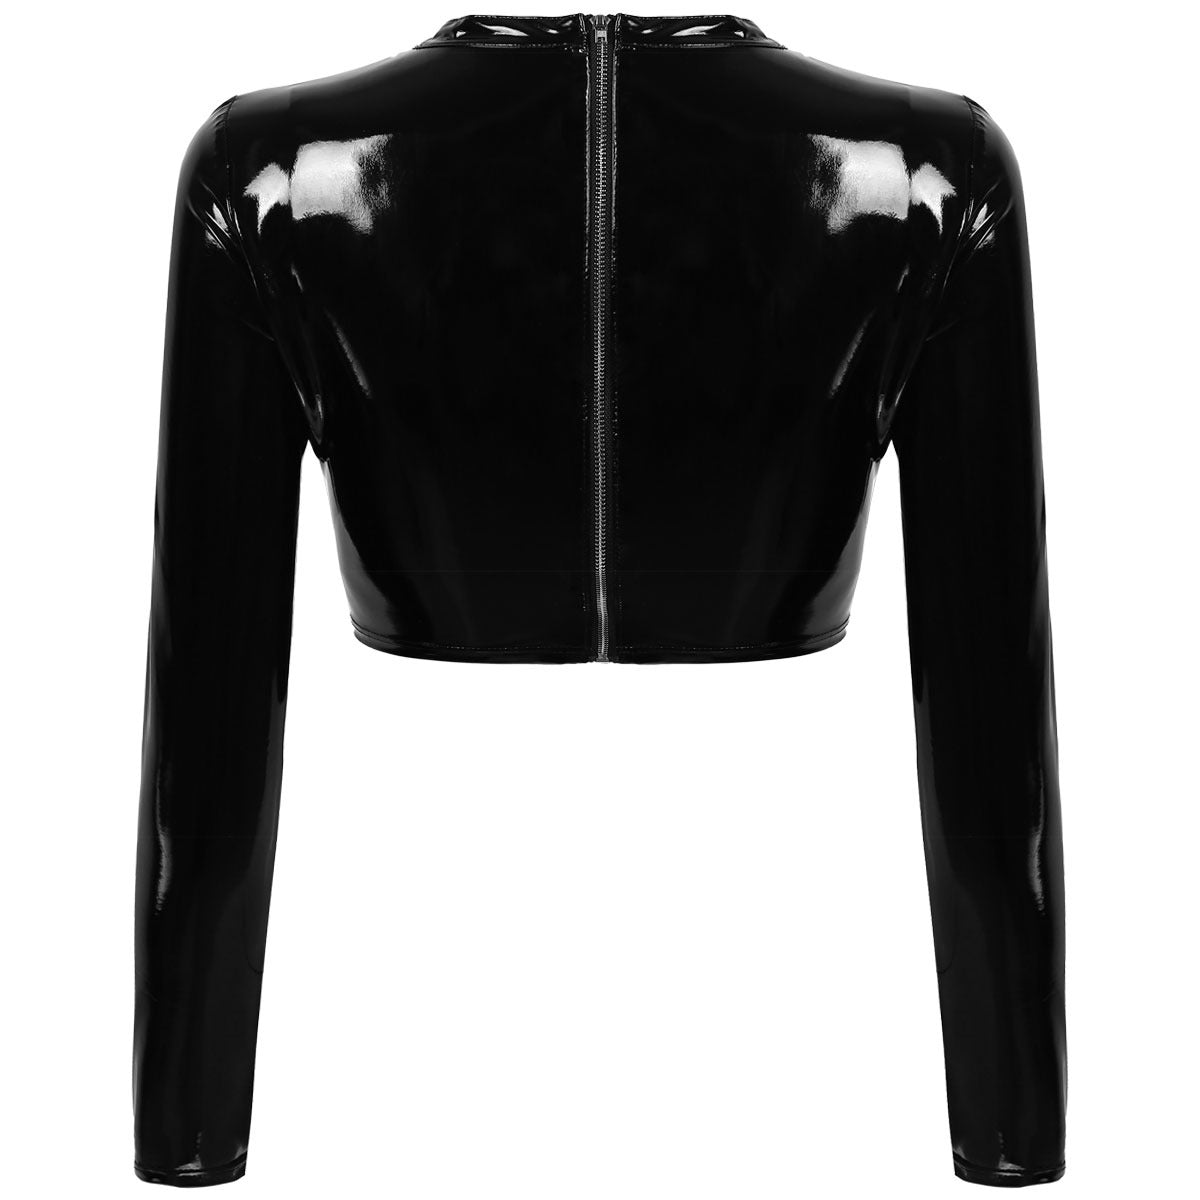 Women's Wet Look Fashion Tops / Patent Leather Hollow Out Front with Buckles Gothic Crop Top - HARD'N'HEAVY